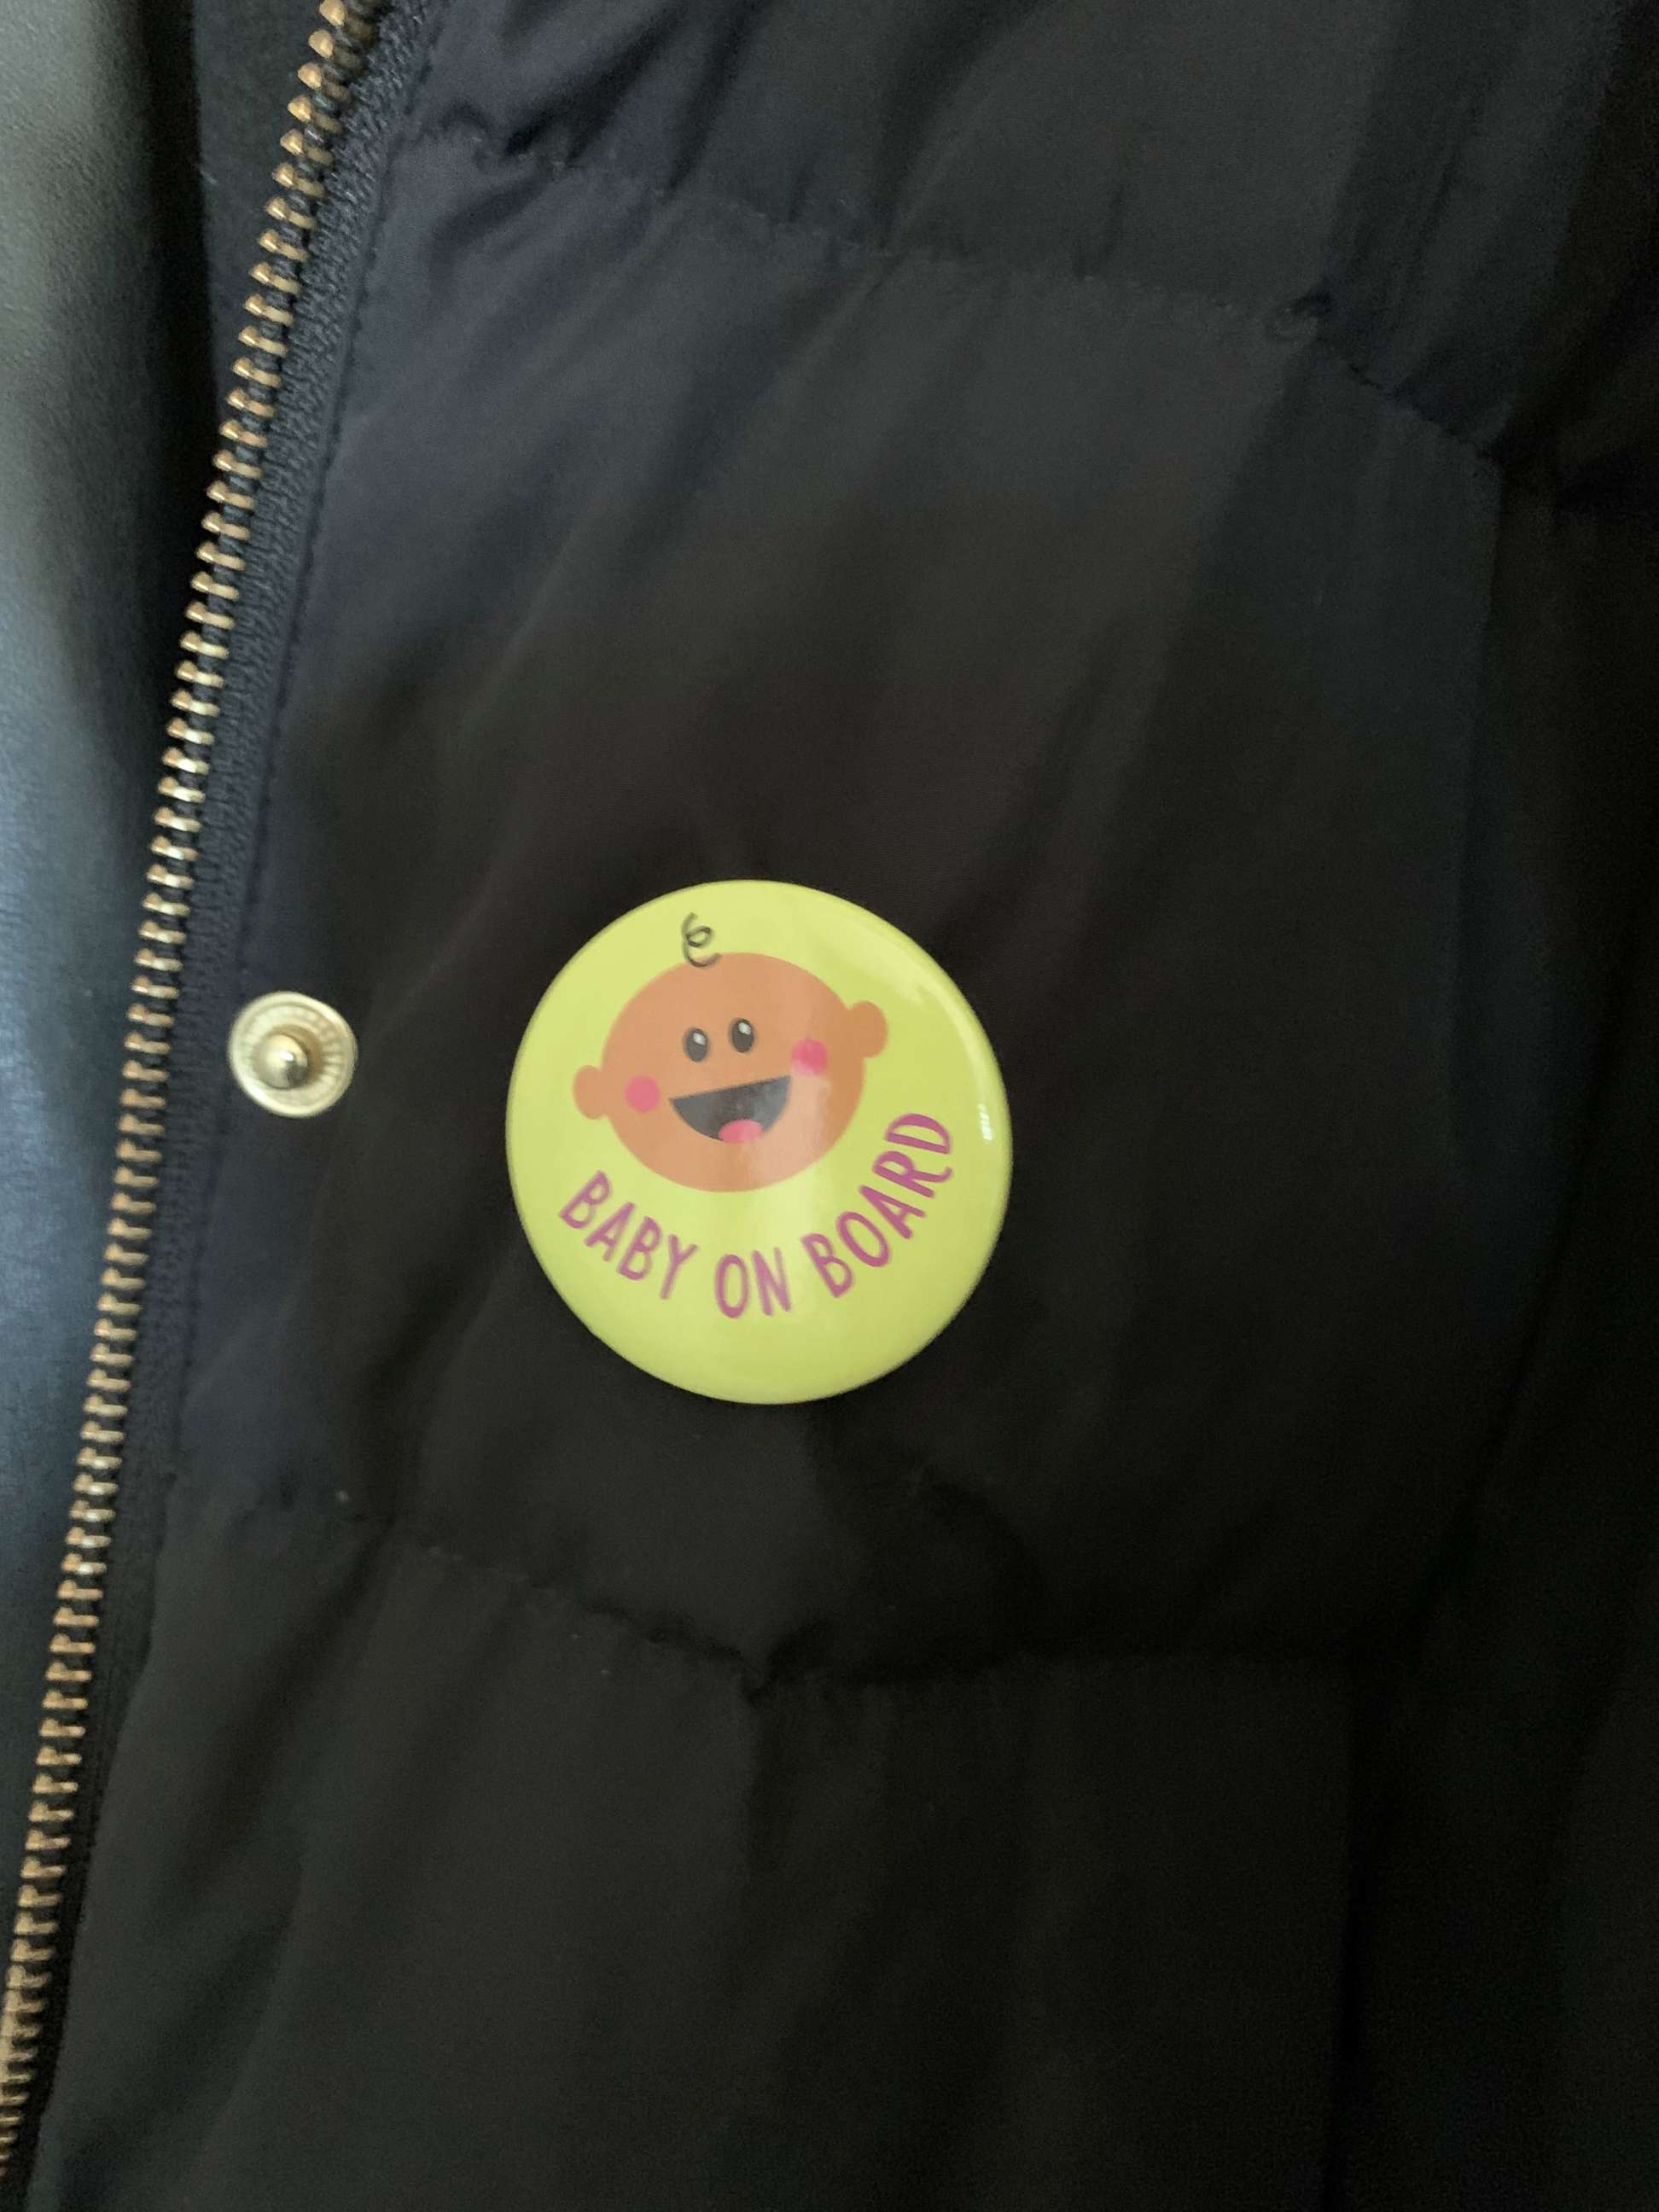 PHOTO: Megan Nufer of Chicago says she received a "Baby on Board" button as a baby shower gift.